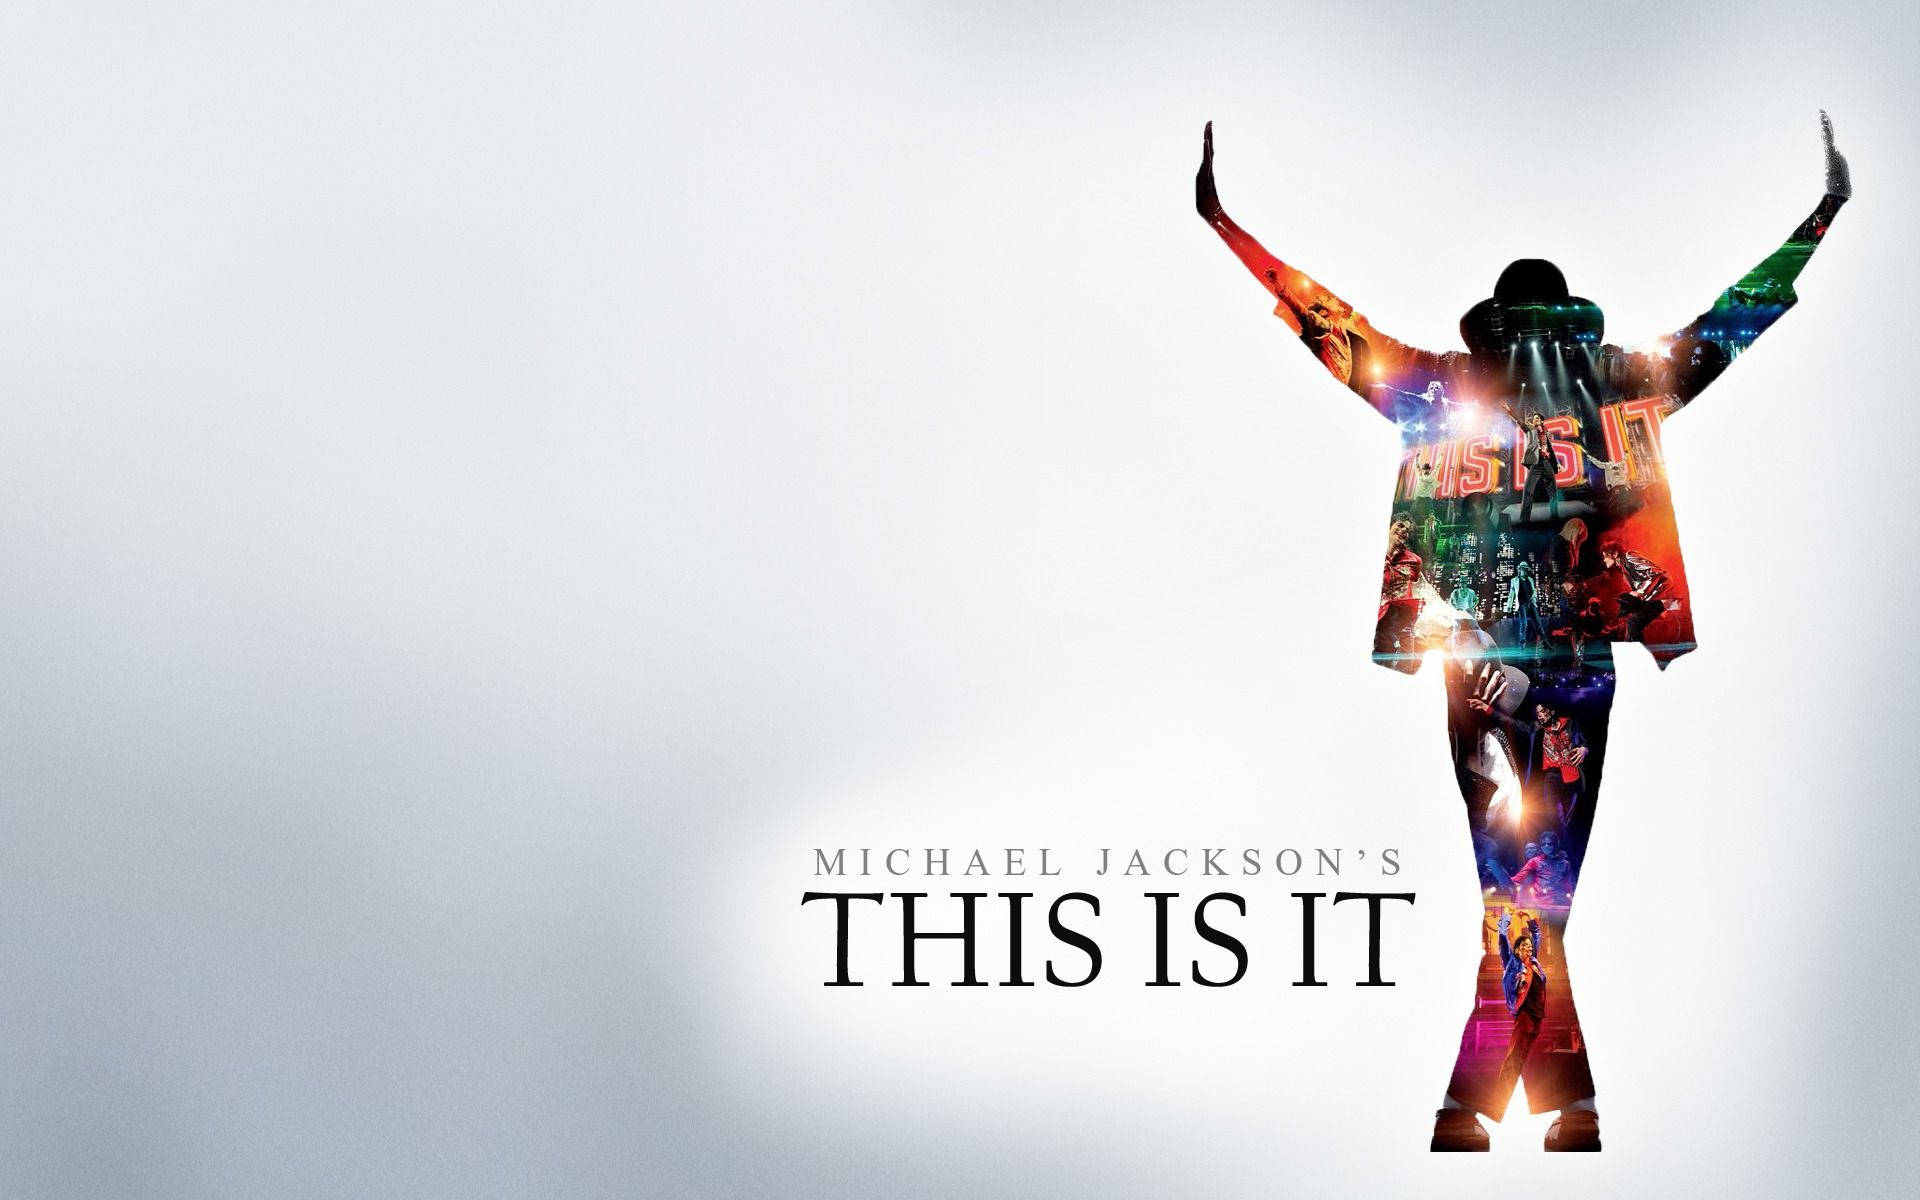 Michael Jackson This Is It Poster Wallpaper